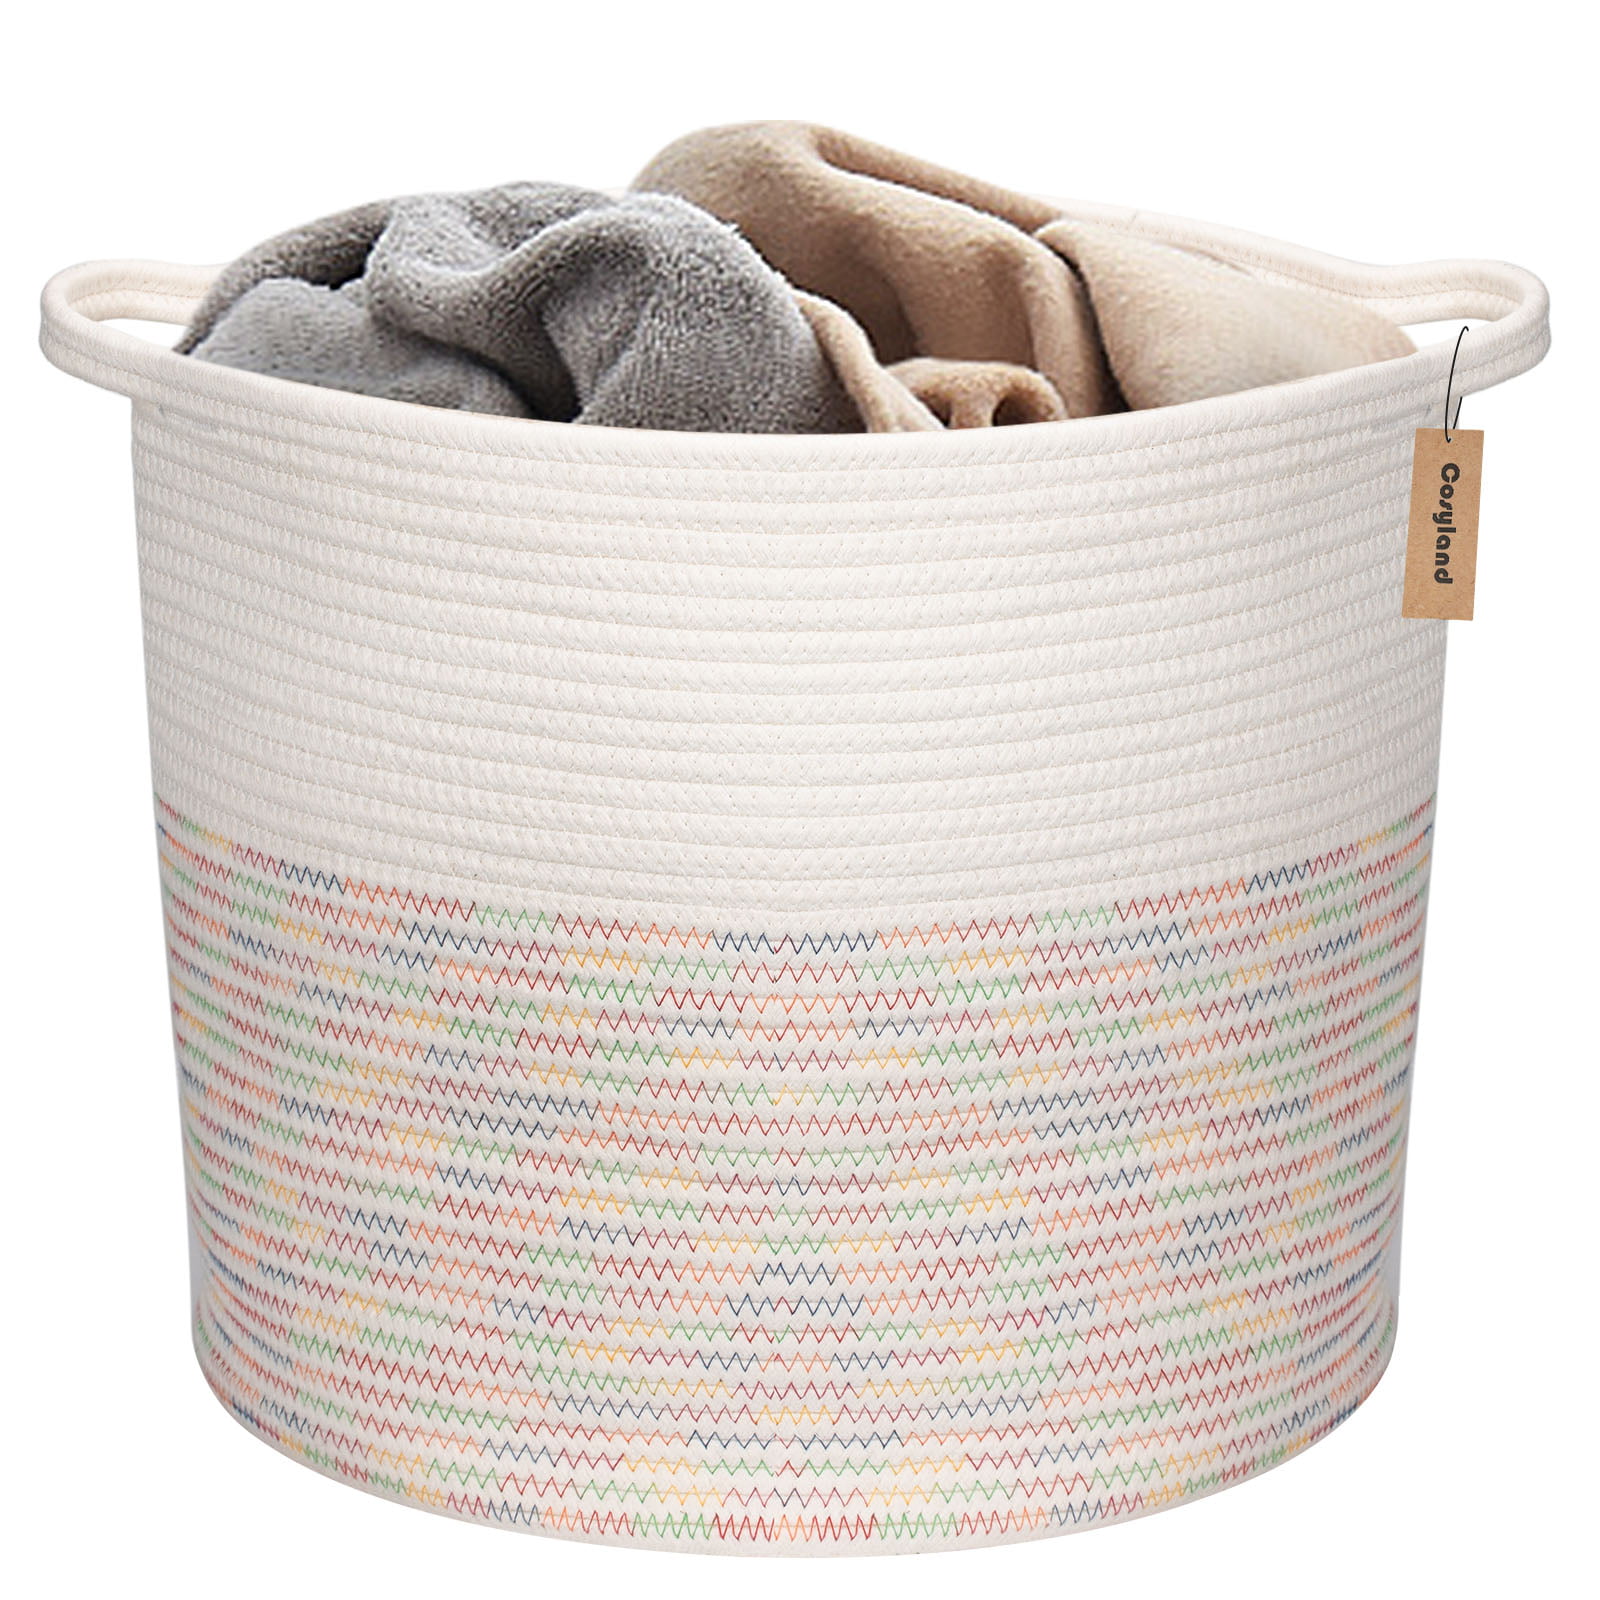 Kids Toys Laundry Basket for Blankets Toys Storage Basket with Handle Comforter Storage Bins Baby Toys Large Cotton Rope Basket Gray 